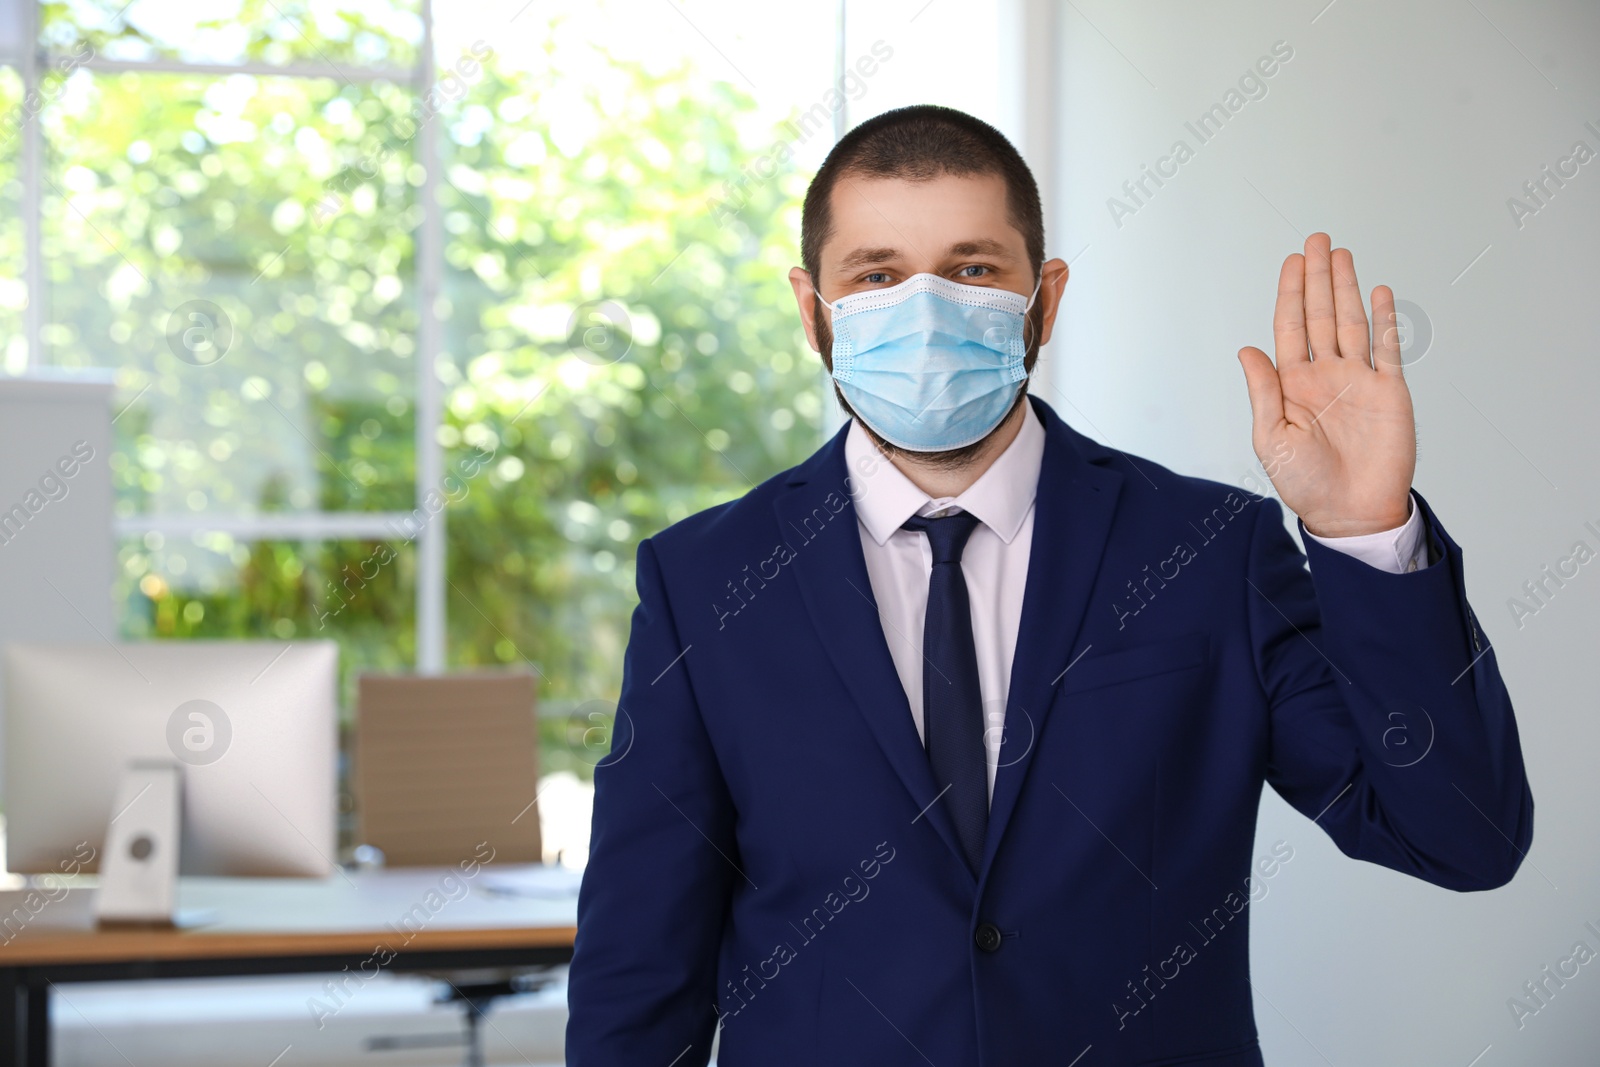 Photo of Man in protective face mask showing hello gesture in office. Keeping social distance during coronavirus pandemic